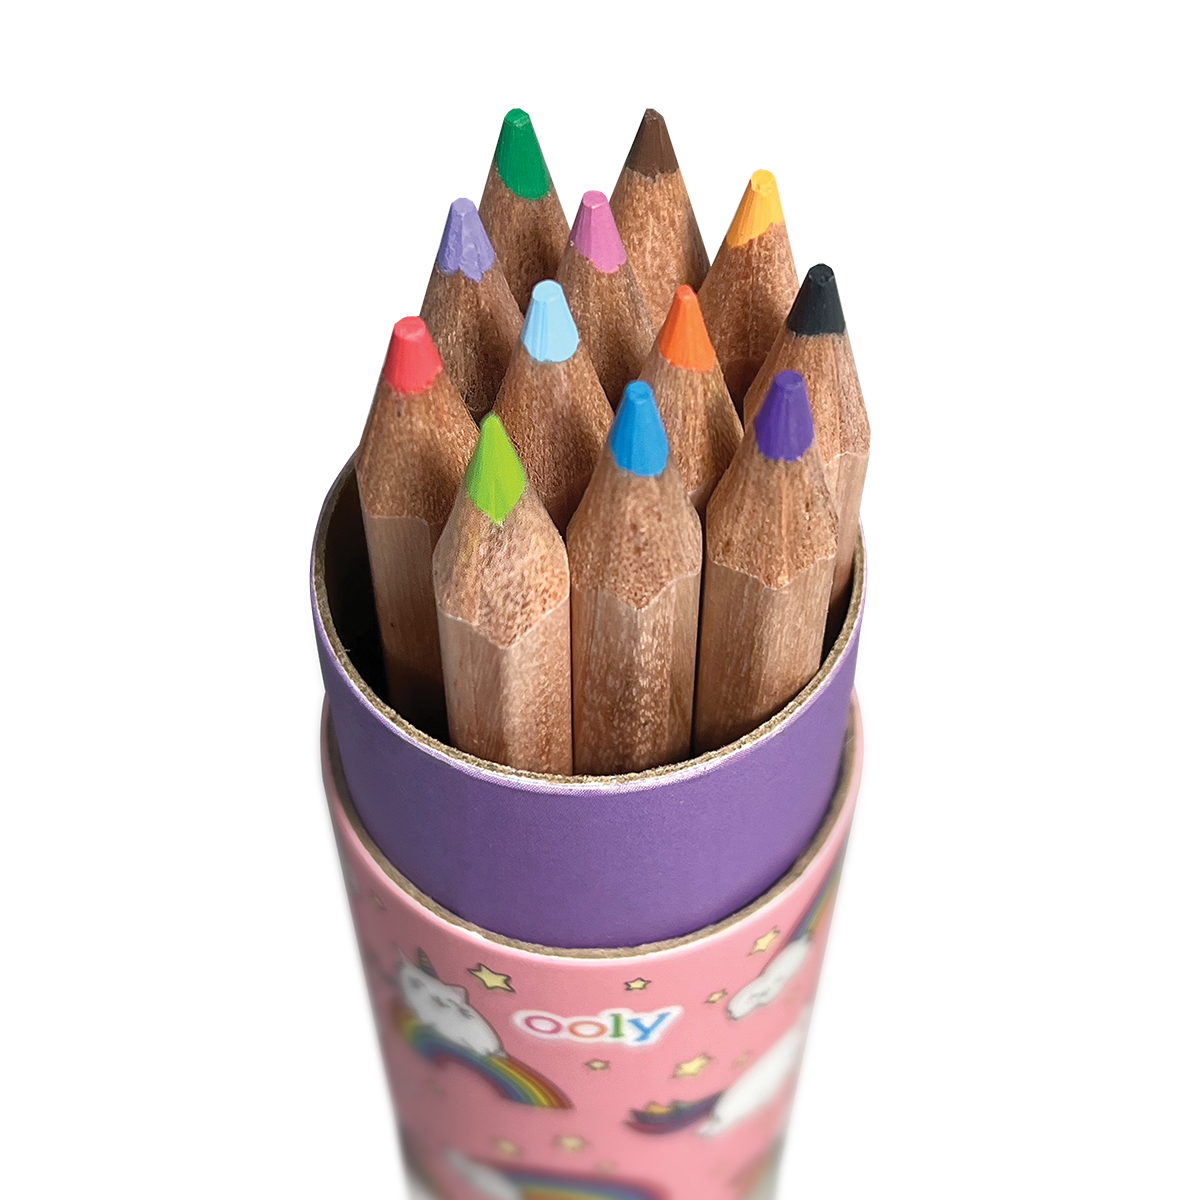 OOLY Draw 'n Doodle Mini Colored Pencils and Sharpener - Rainbow Unicorn in packaging